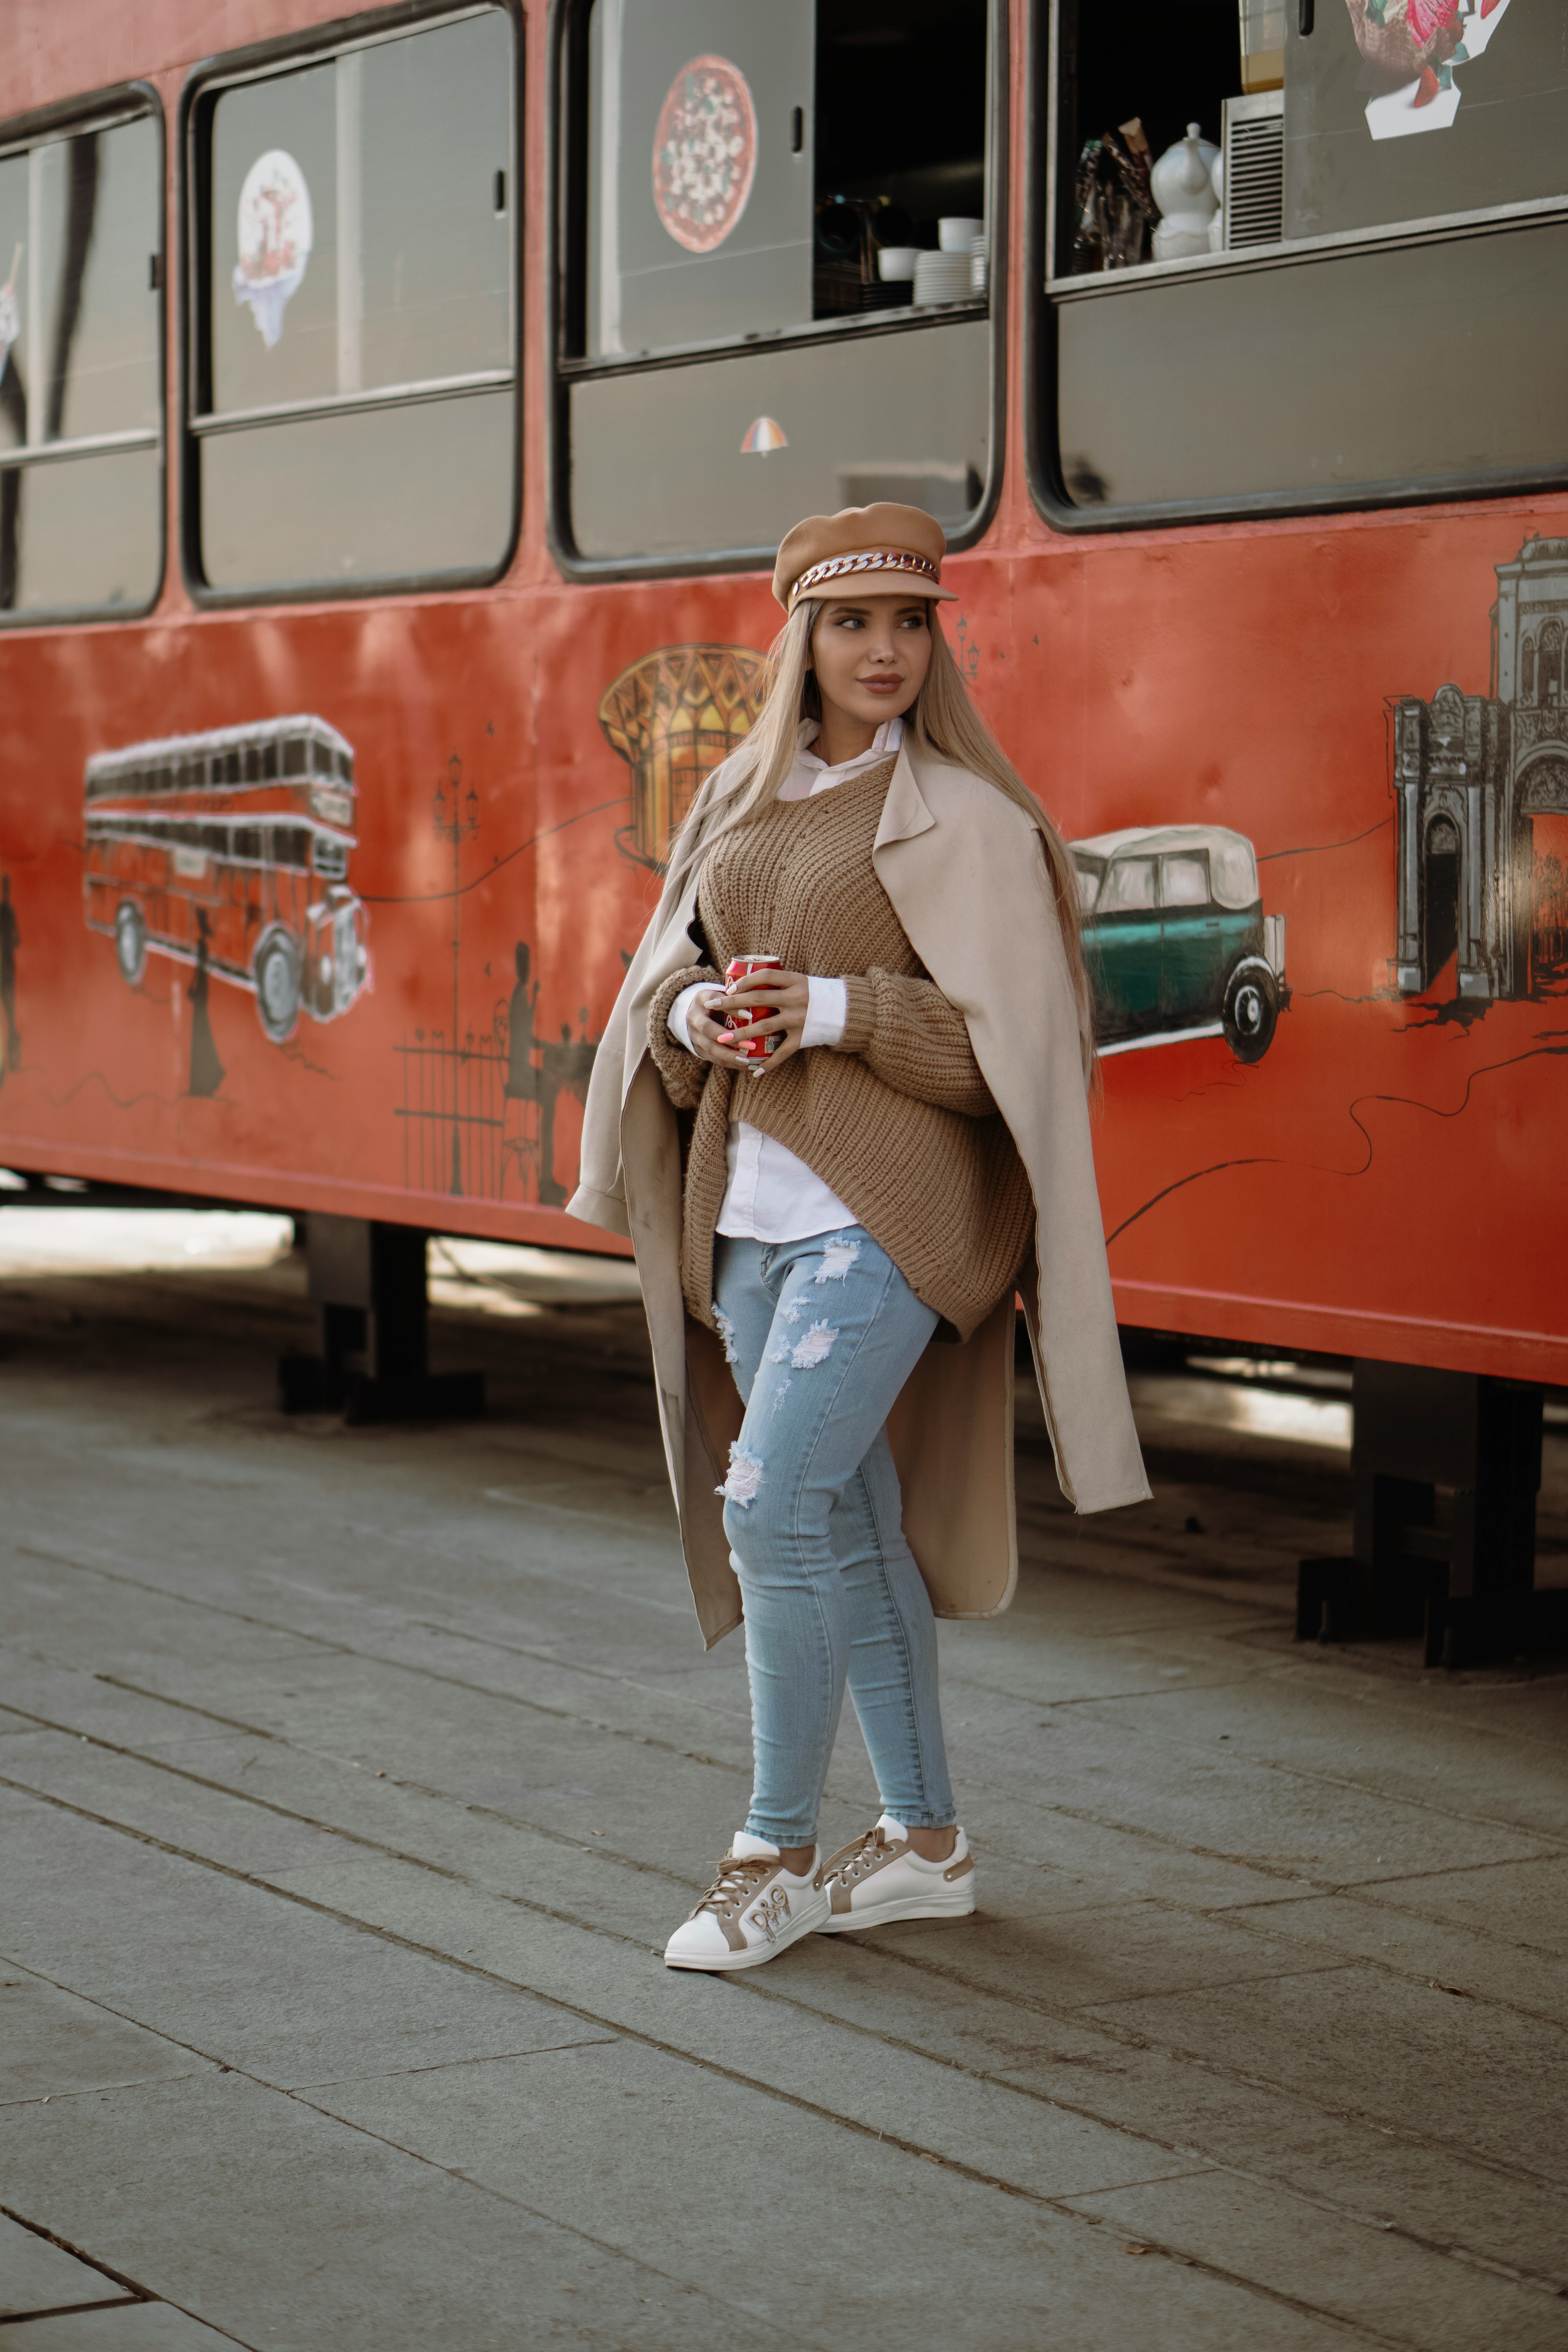 woman in brown coat and blue denim jeans standing beside red bus